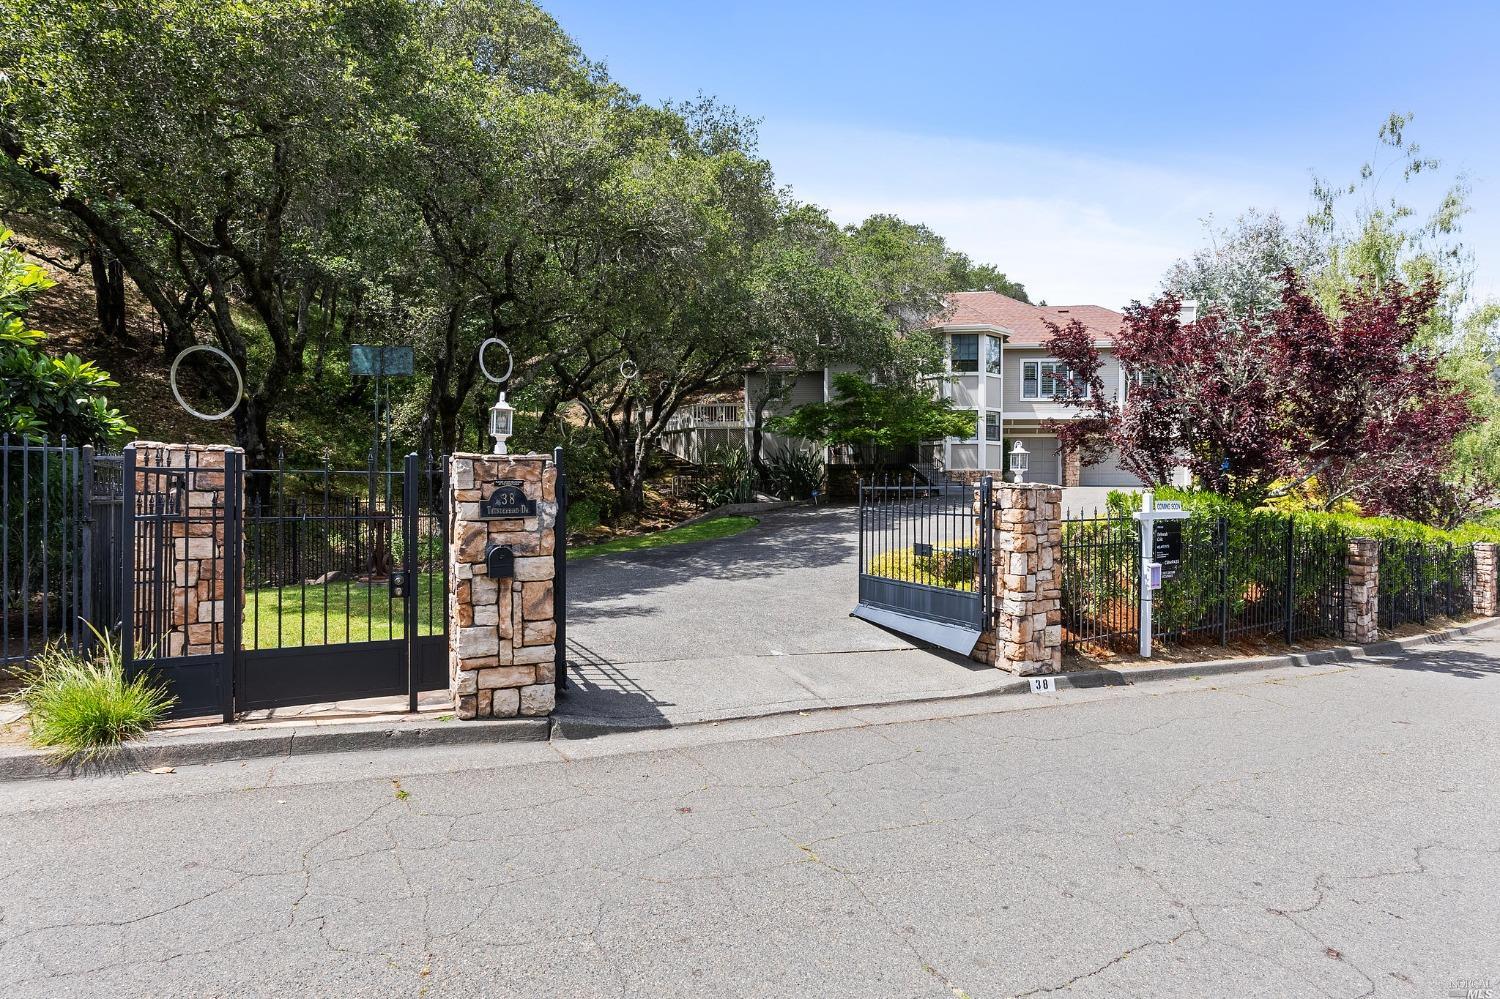 Stately gated entry w/ stainless steel sculptures displayed in the oak trees.